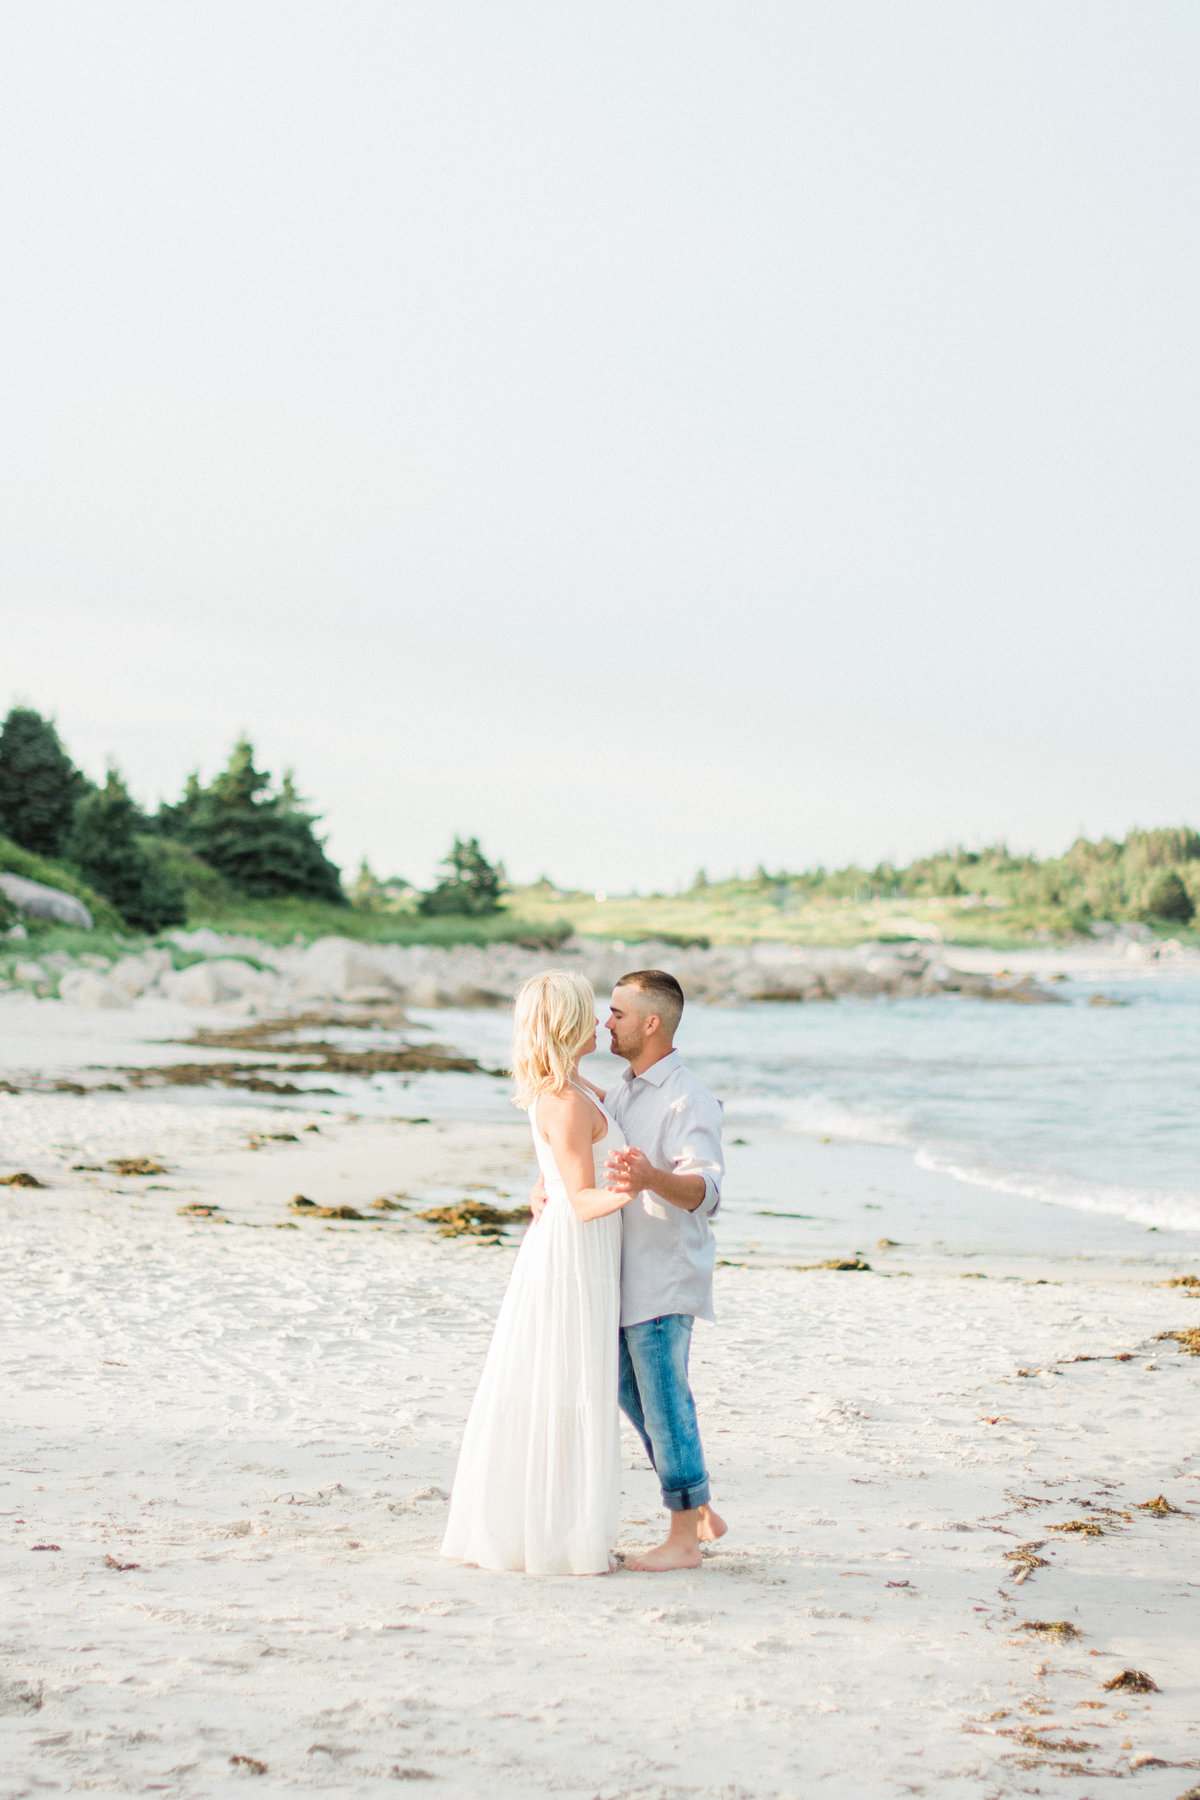 Jacqueline Anne Photography  - Hailey and Shea - Crystal Crescent Beach Engagement-74